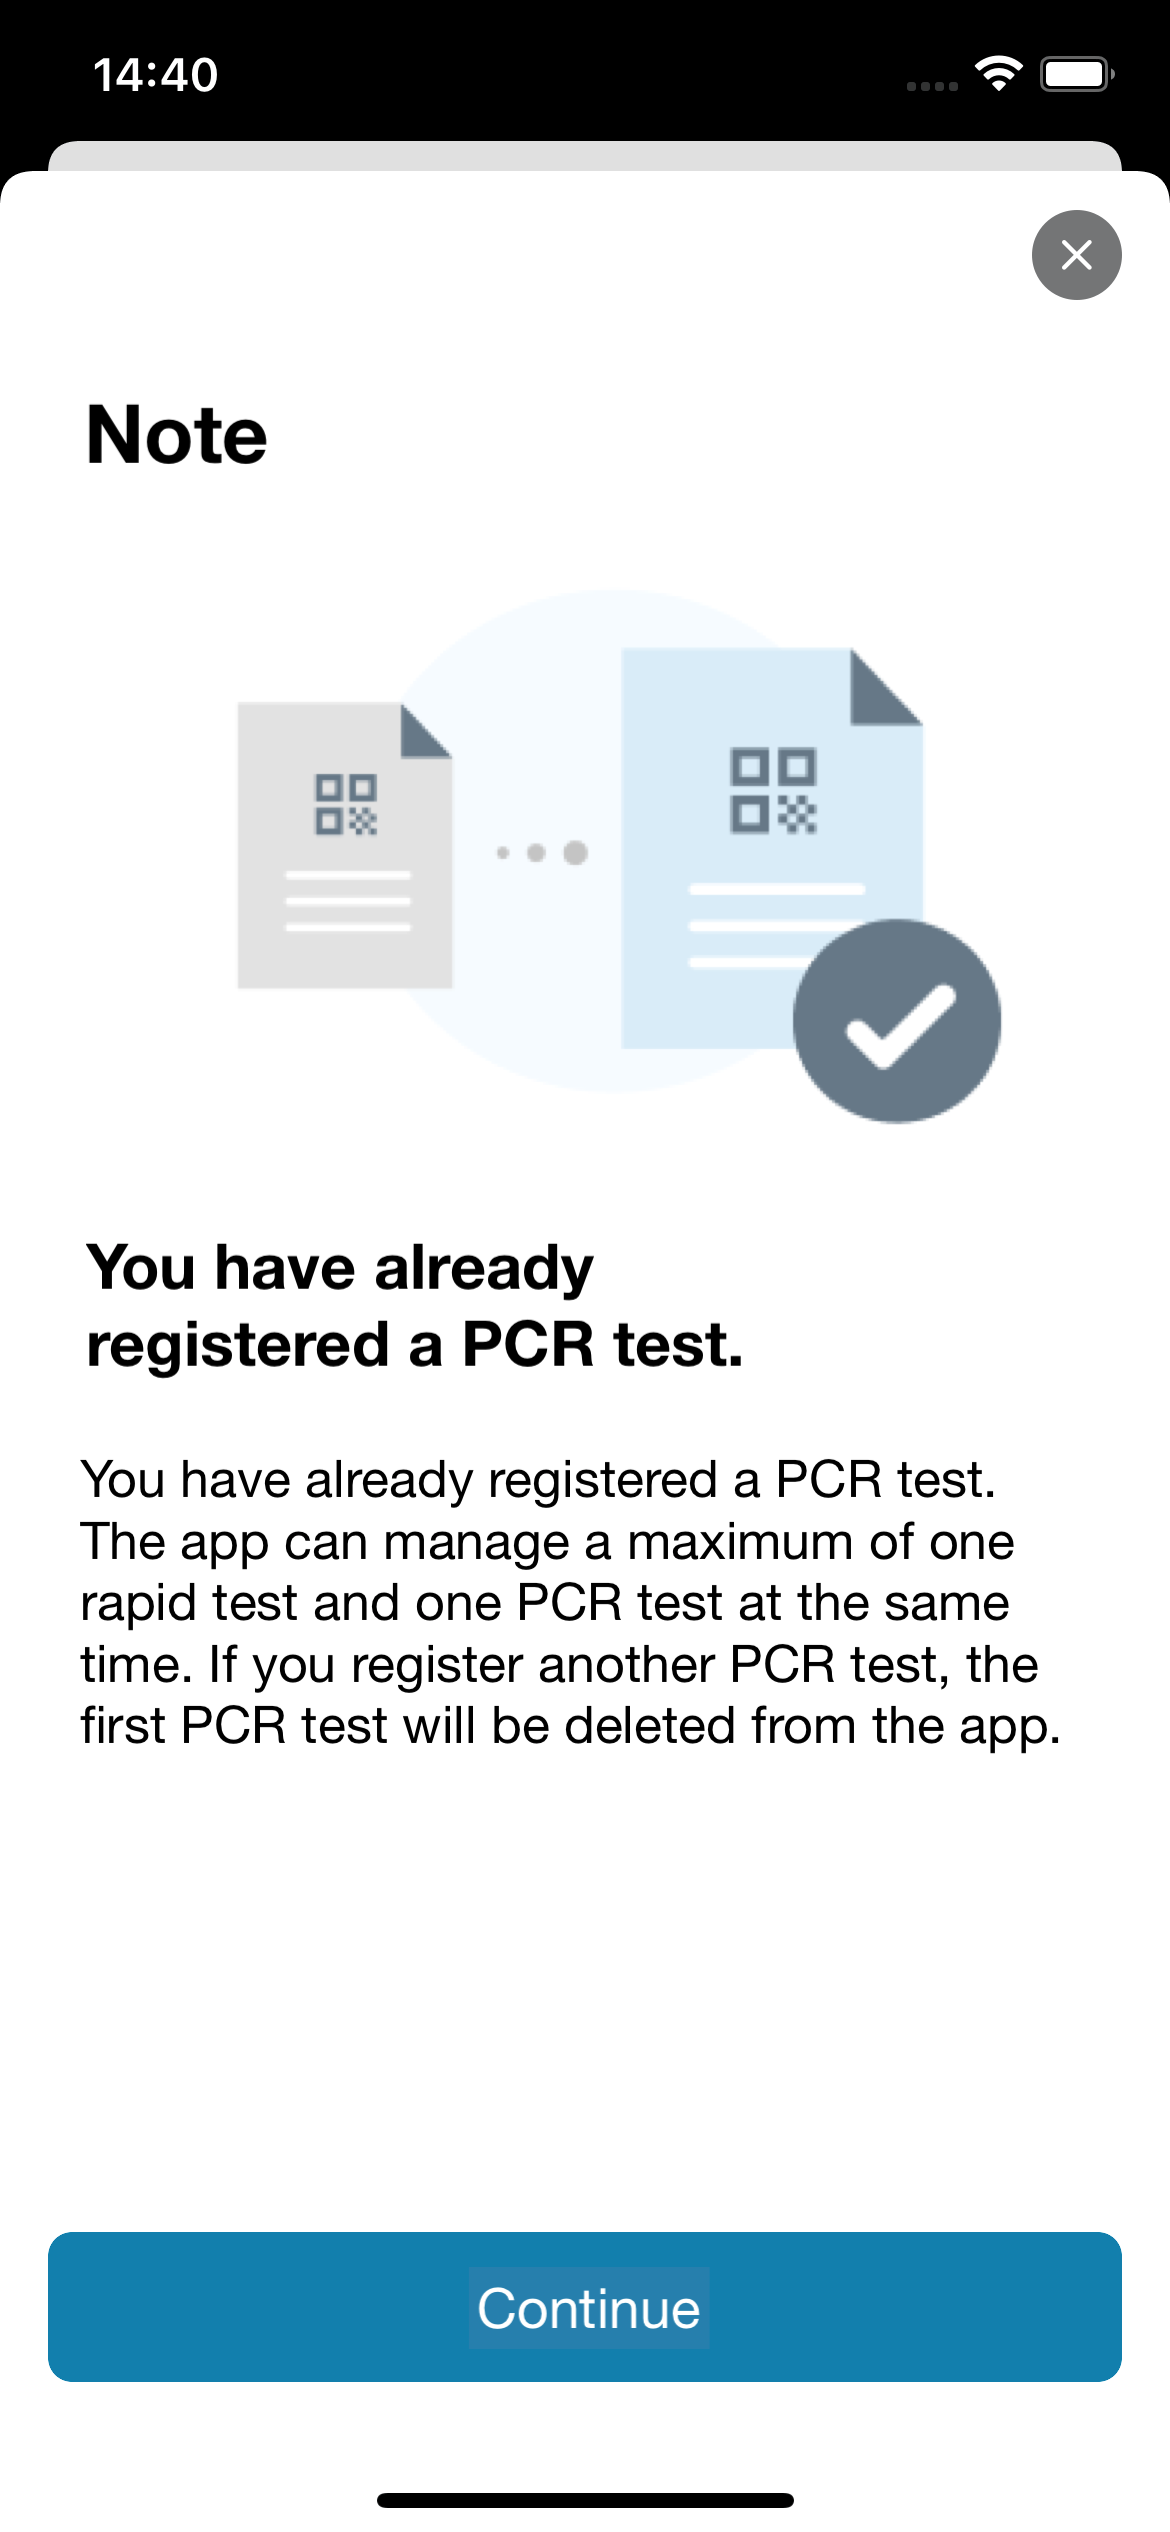 The app can manage a maximum of one rapid test and one PCR test at the same time. If you register another PCR test, the first PCR test will be deleted from the app.